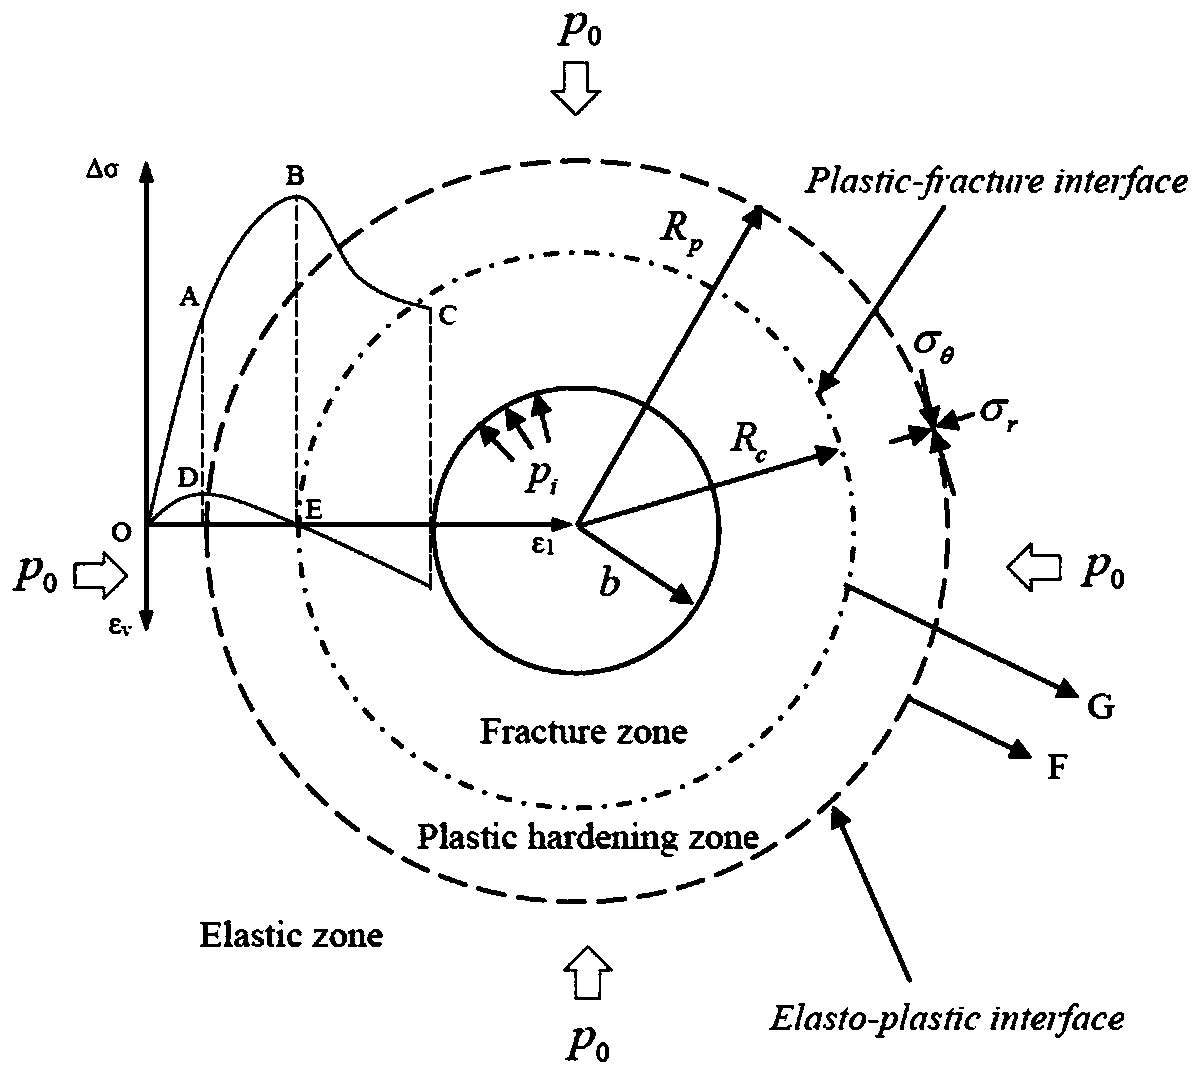 Method for measuring surrounding rock displacement of deeply-buried circular tunnel based on limit state theory